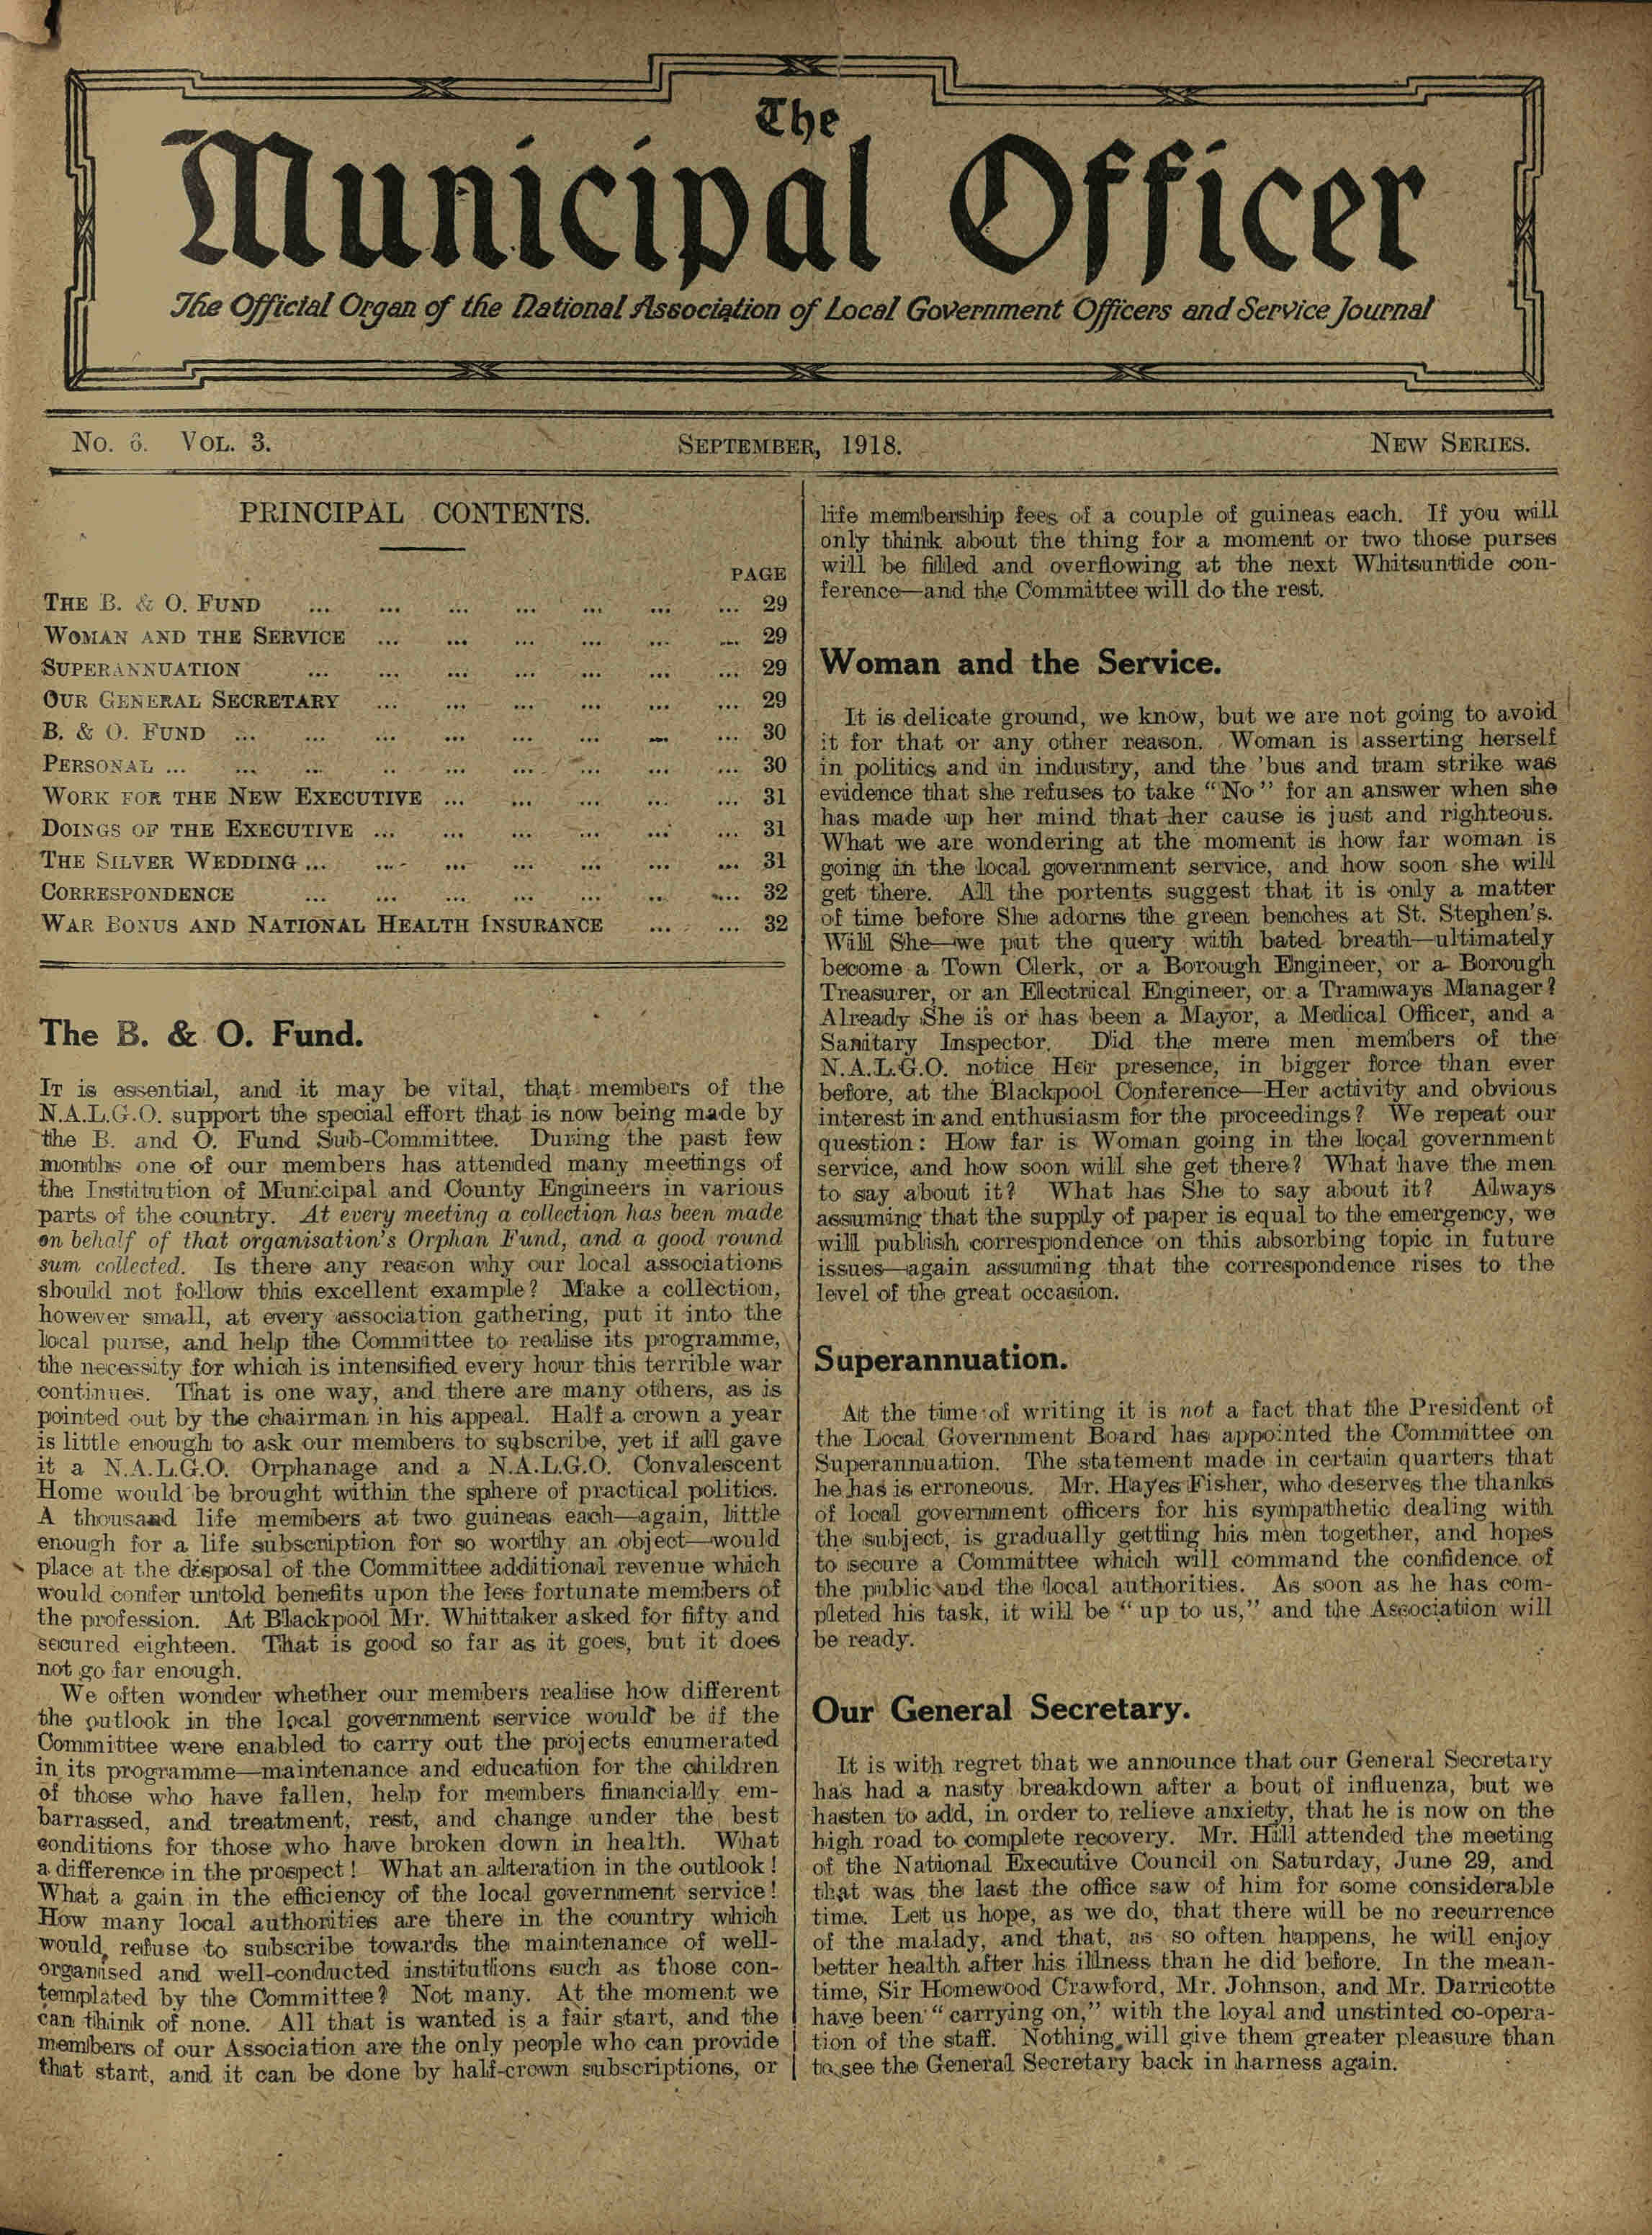 Front page of The Municipal Officer, September 1918